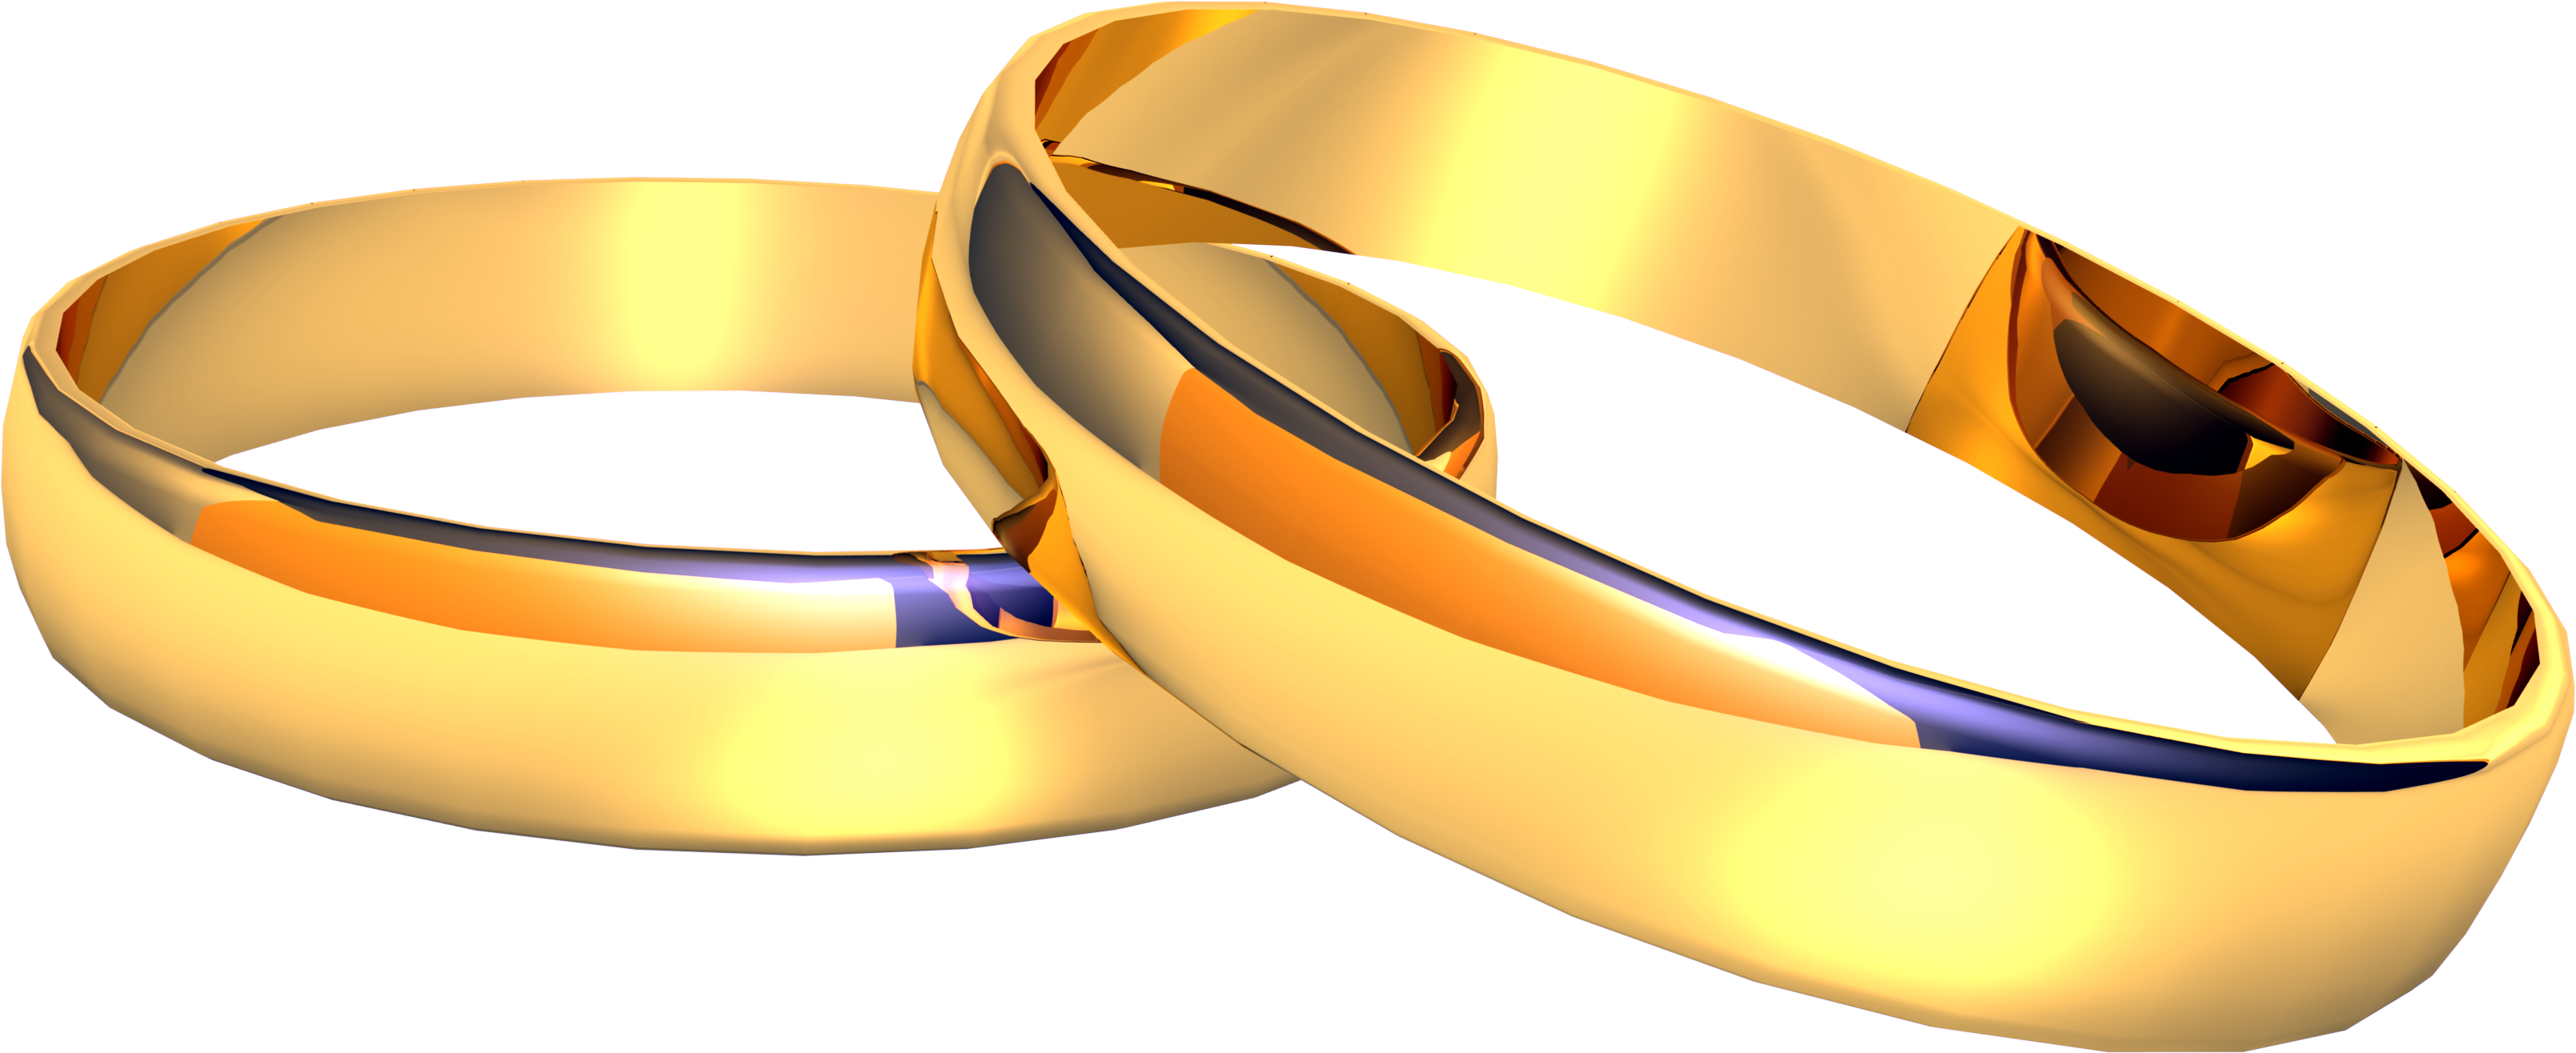 A Ring PNG - 160591